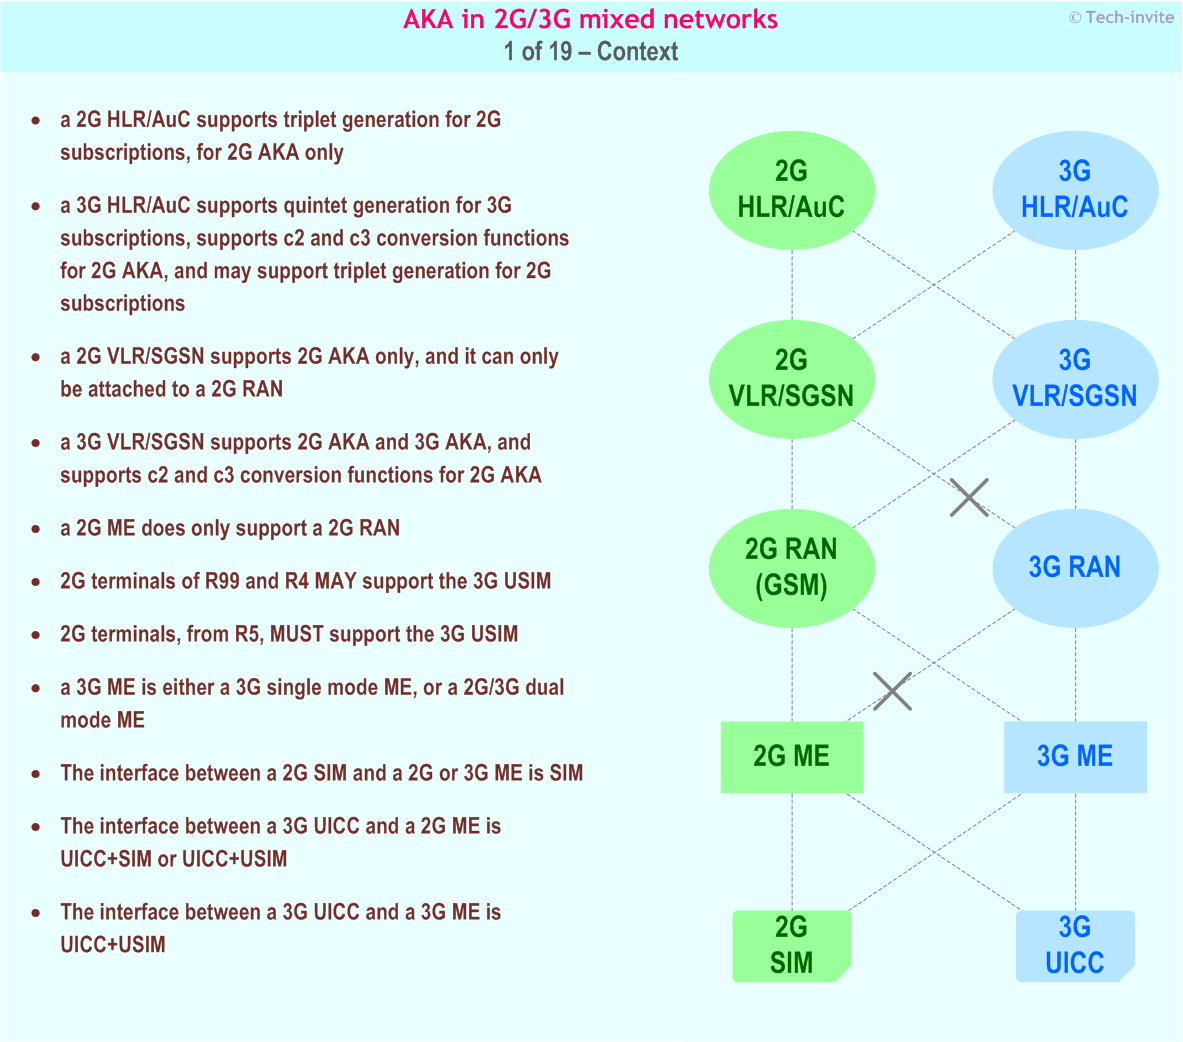 3GPP AKA in 2G/3G mixed networks according to 3GPP TR 31.900